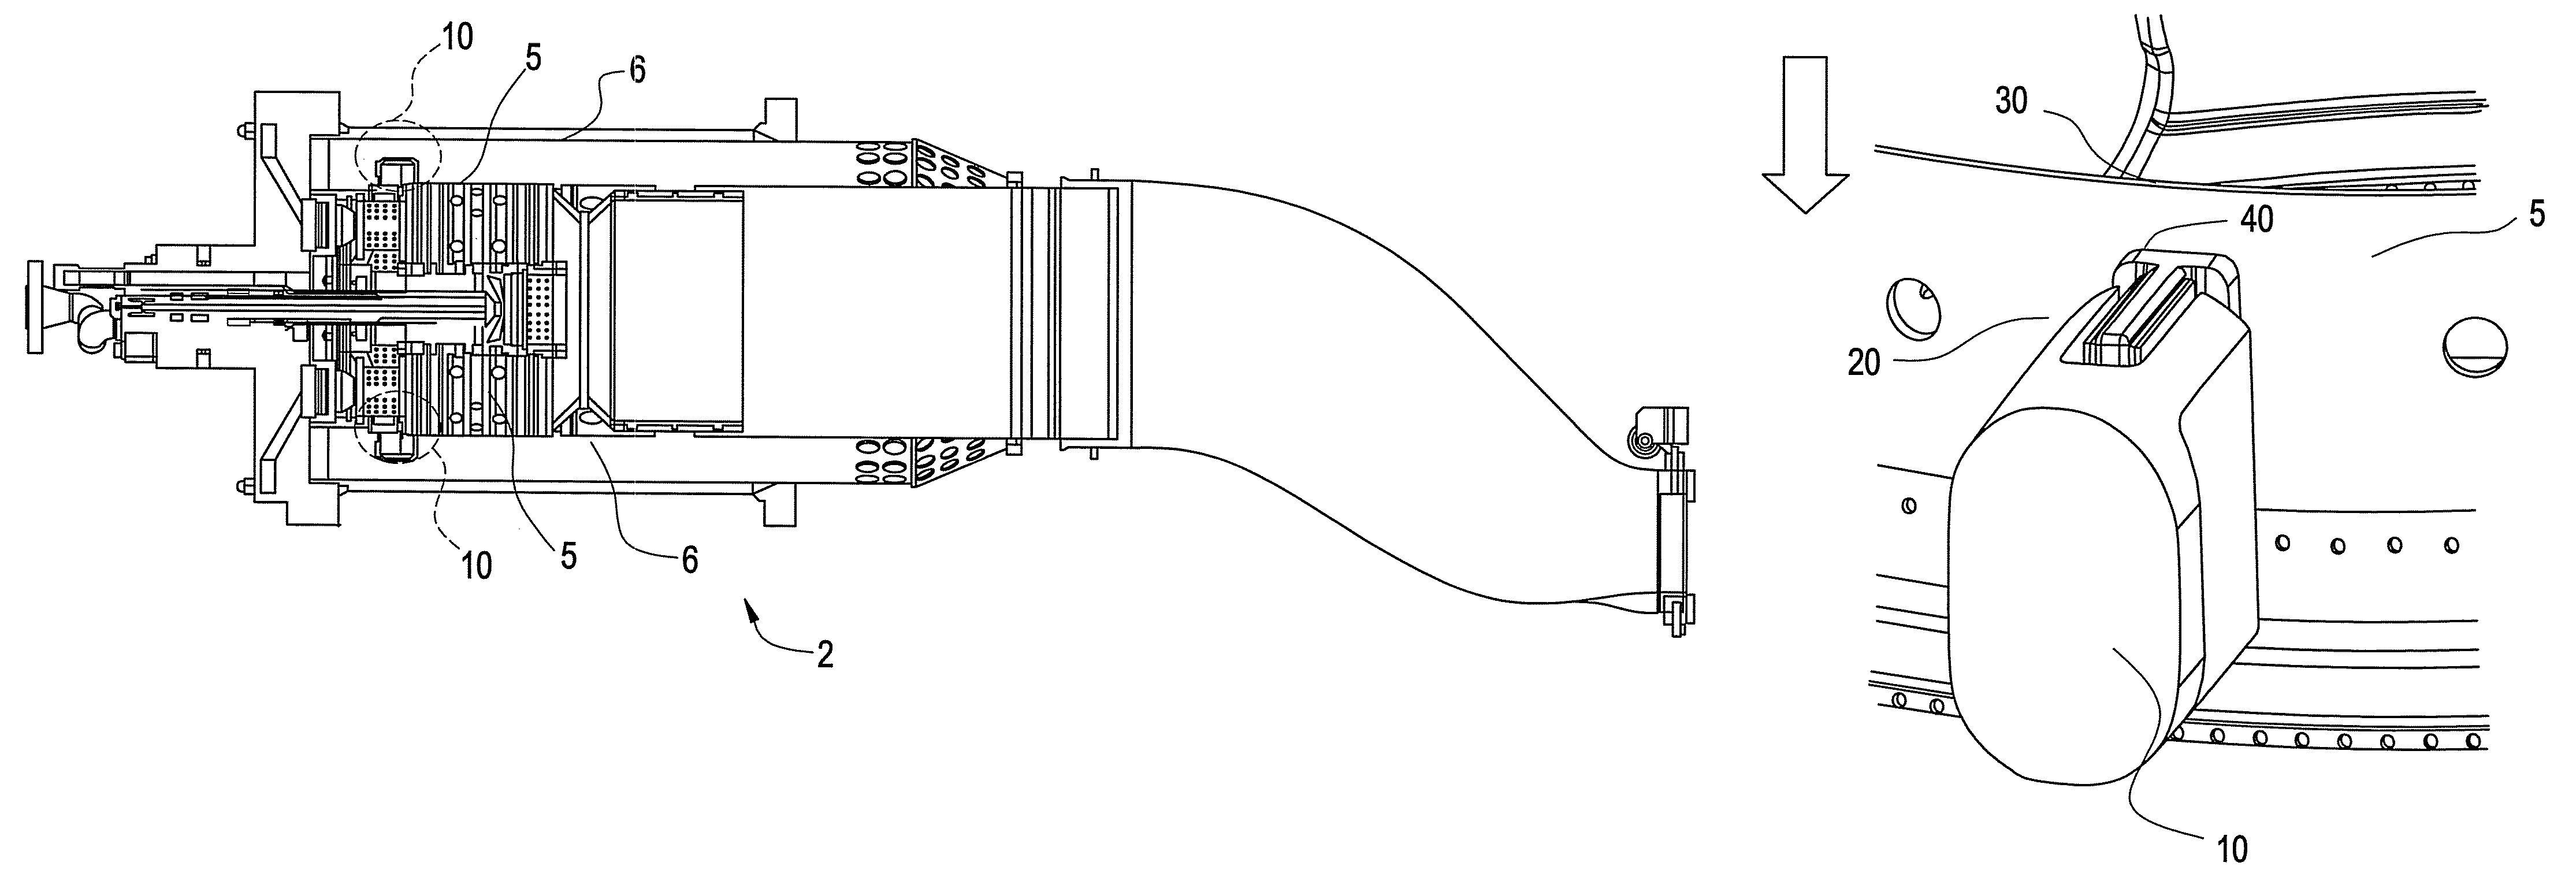 Combustion liner stop in a gas turbine